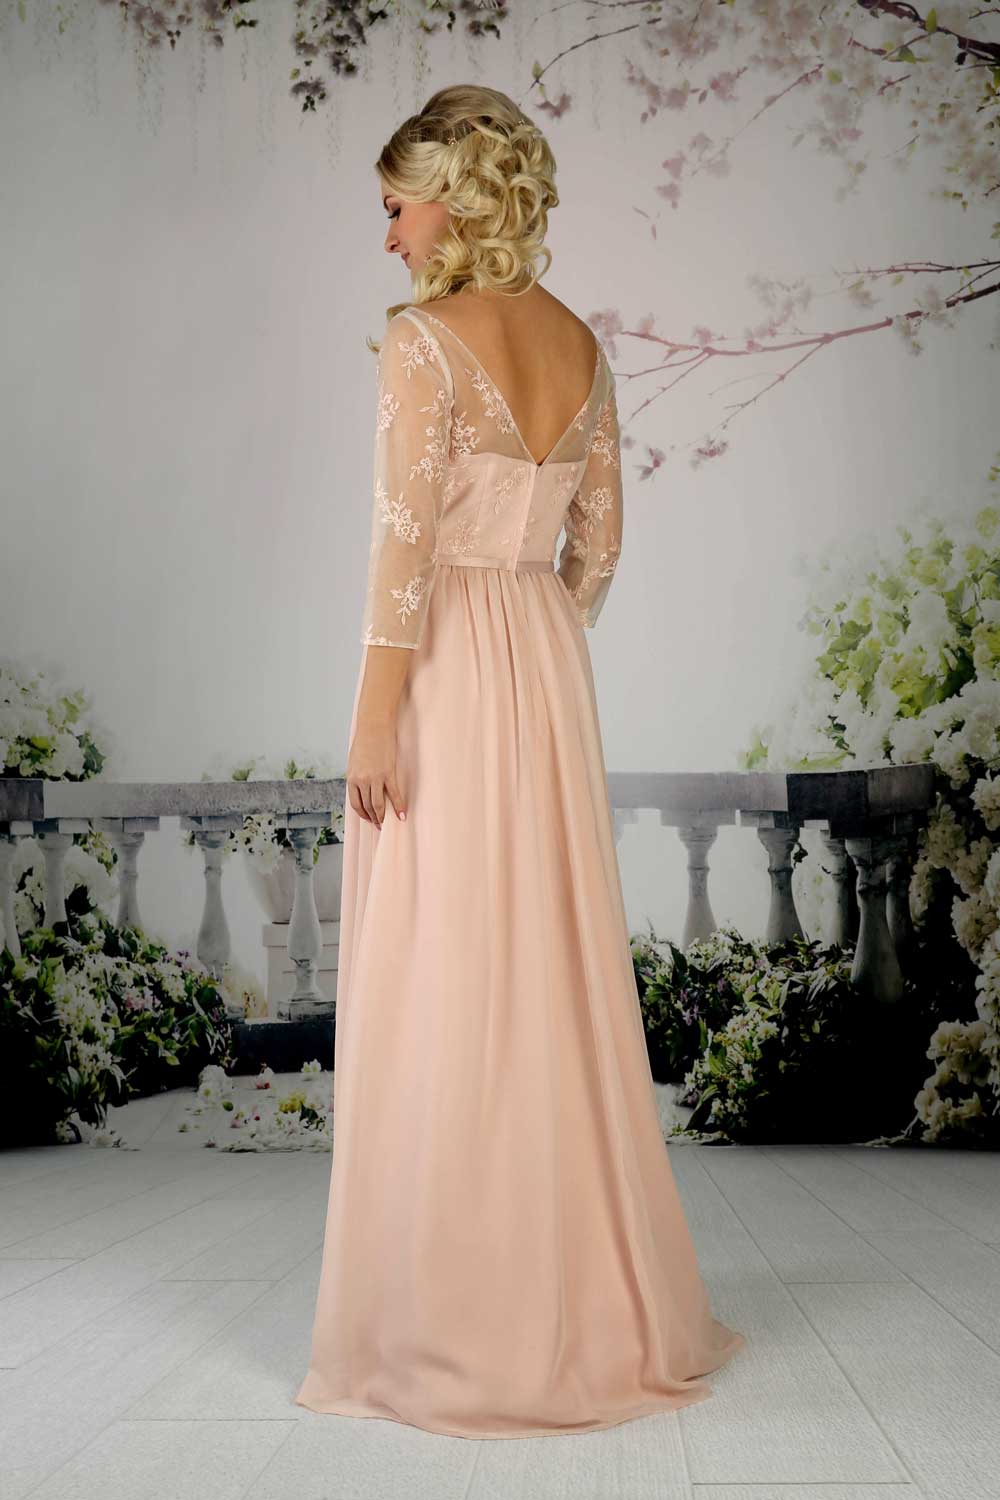 Gathered chiffon skirt with an embroidered lace bodice